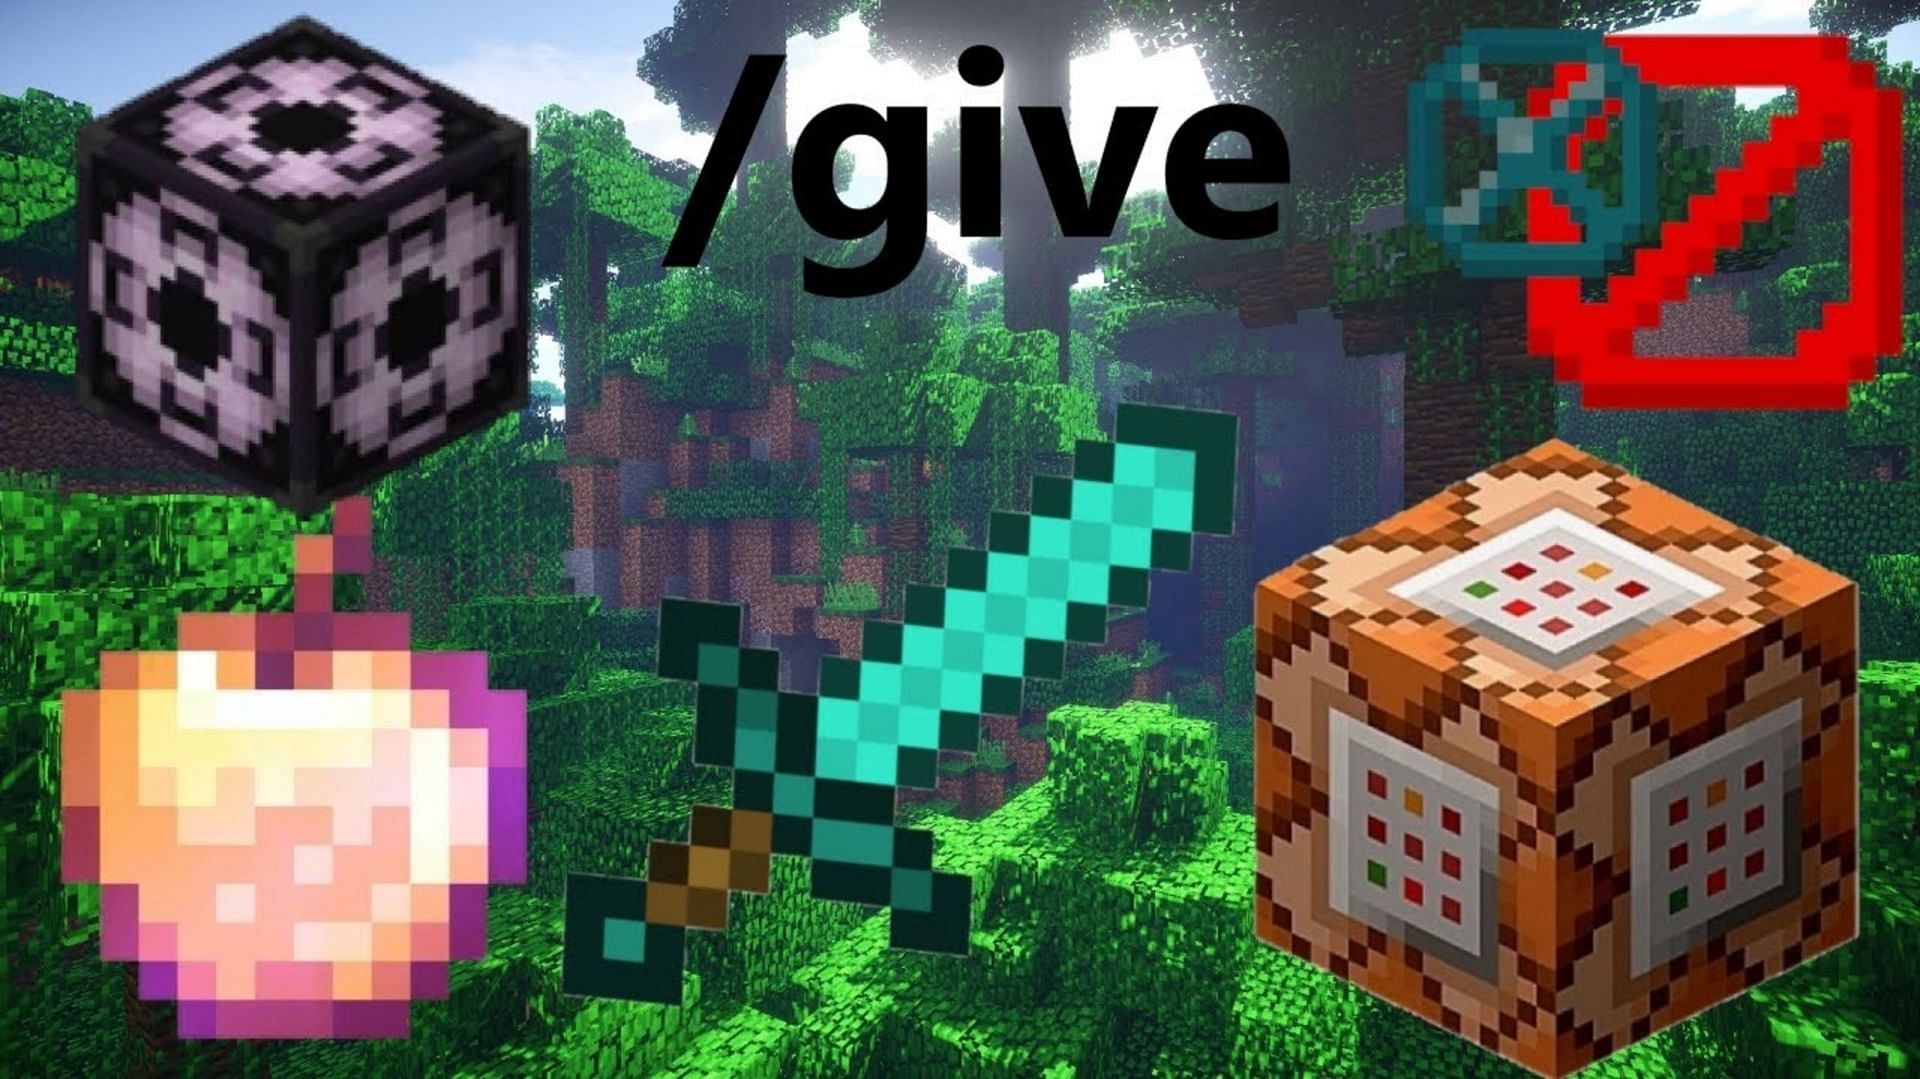 /Give provides players with a given item or block (Image via Mojang)